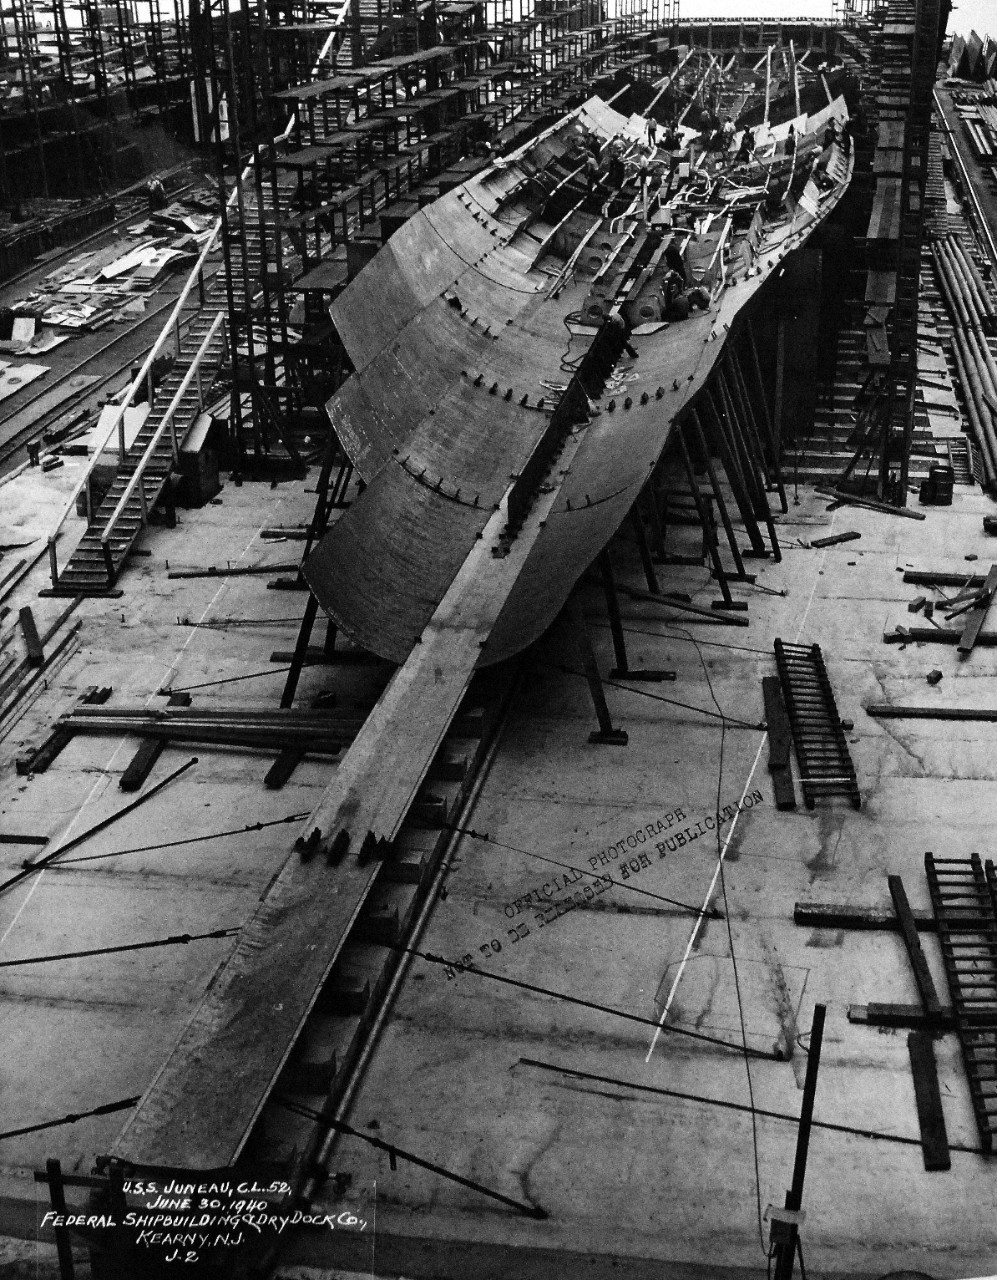 19-LC-28131:  USS Juneau (CL-52),  June 1940.     Light cruiser is shown under construction at Federal Shipbuilding and Drydock Company, Kearny, New Jersey, June 30, 1940.    U.S. Bureau of Ships Photograph, now in the collections of the National Archives.  (2015/02/18). 